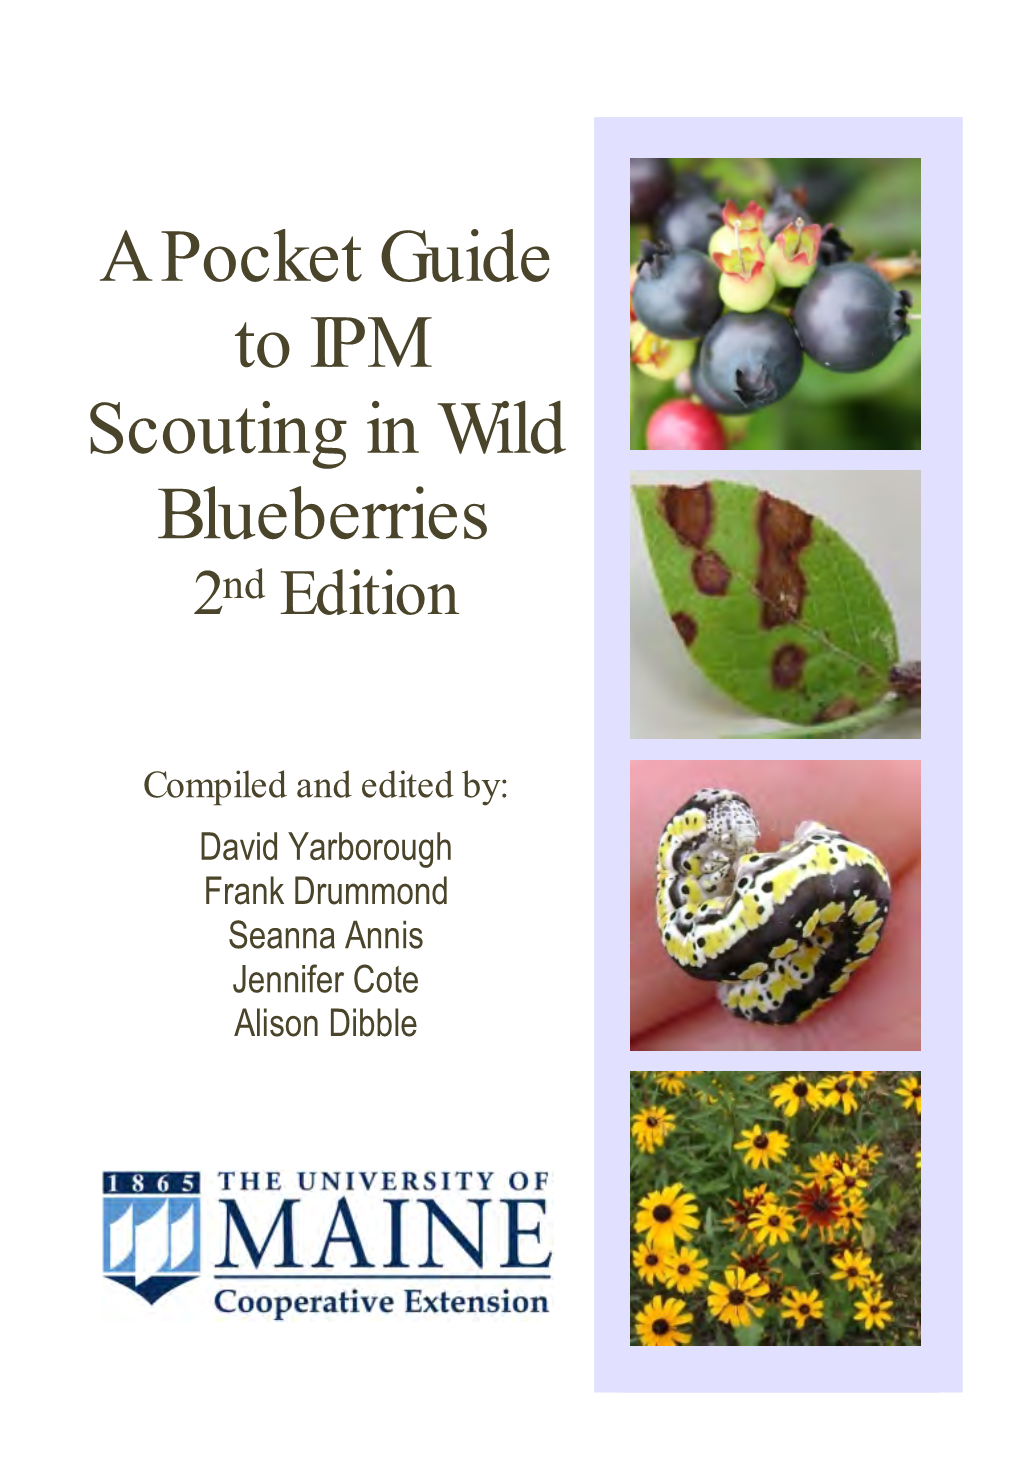 A Pocket Guide to IPM Scouting in Wild Blueberries, 2Nd Edition